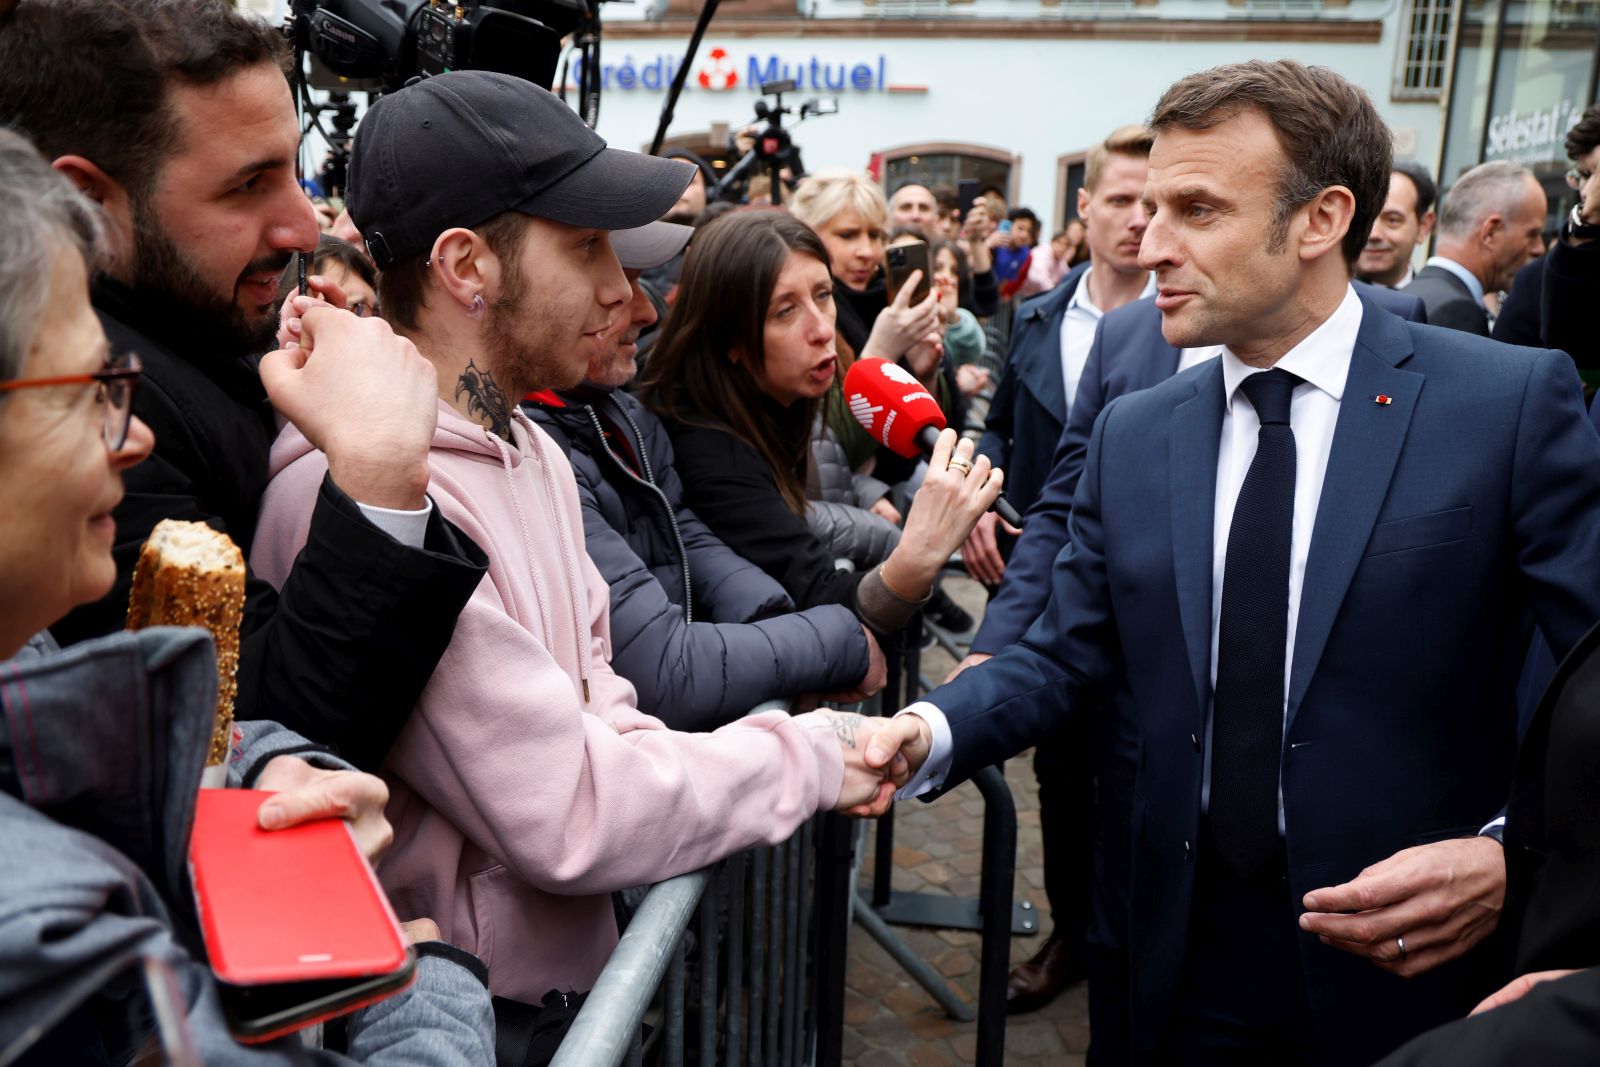 epa10580233 French President Emmanuel Macron (R) shakes hands with people during a visit in Selestat, eastern France, 19 April 2023. Macron, whose reforms including an increase to the pension age have earned him widespread animosity in recent weeks, makes a visit on the theme of reindustrialisation.  EPA/LUDOVIC MARIN / POOL  MAXPPP OUT